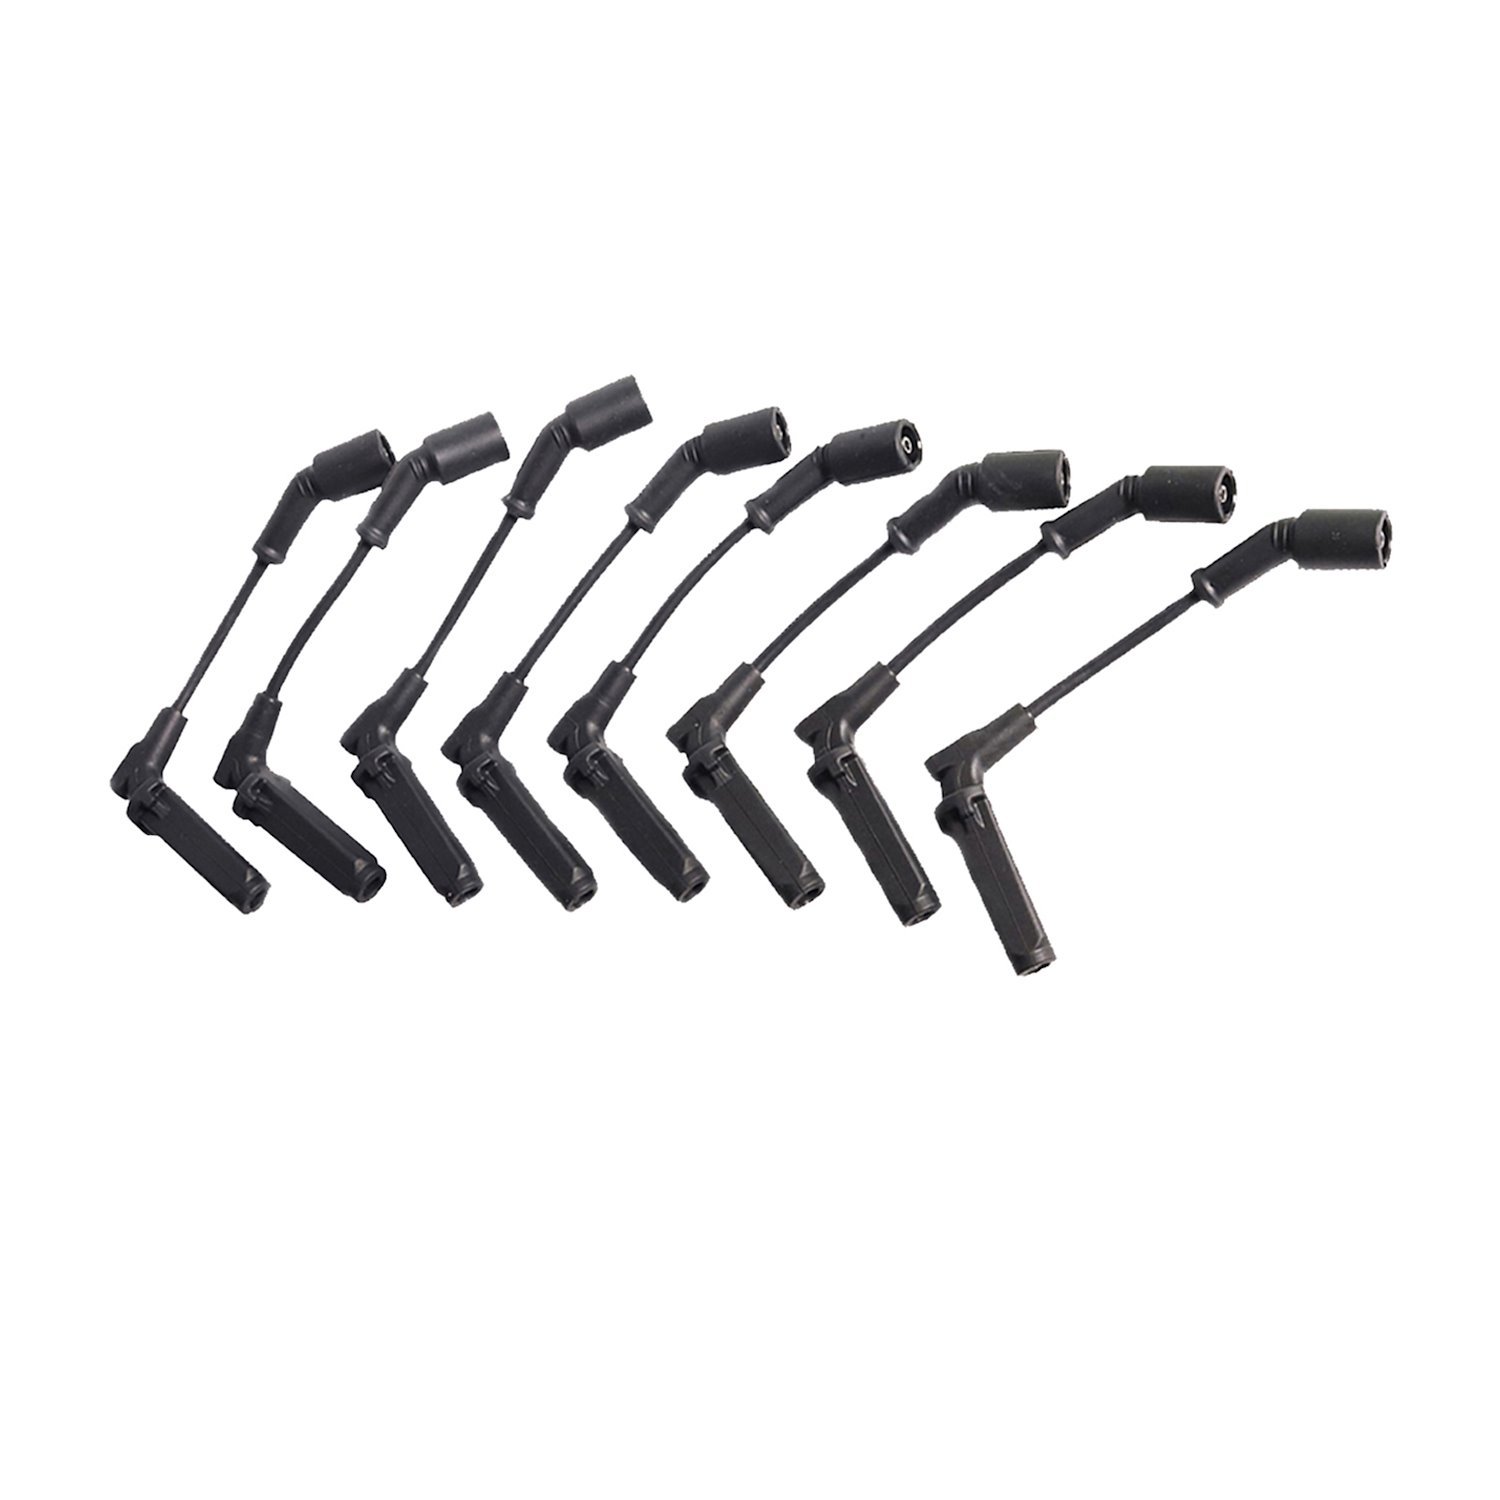 OE Replacement Spark Plug Wire Set for GM 4.8/5.3/6.0L V8